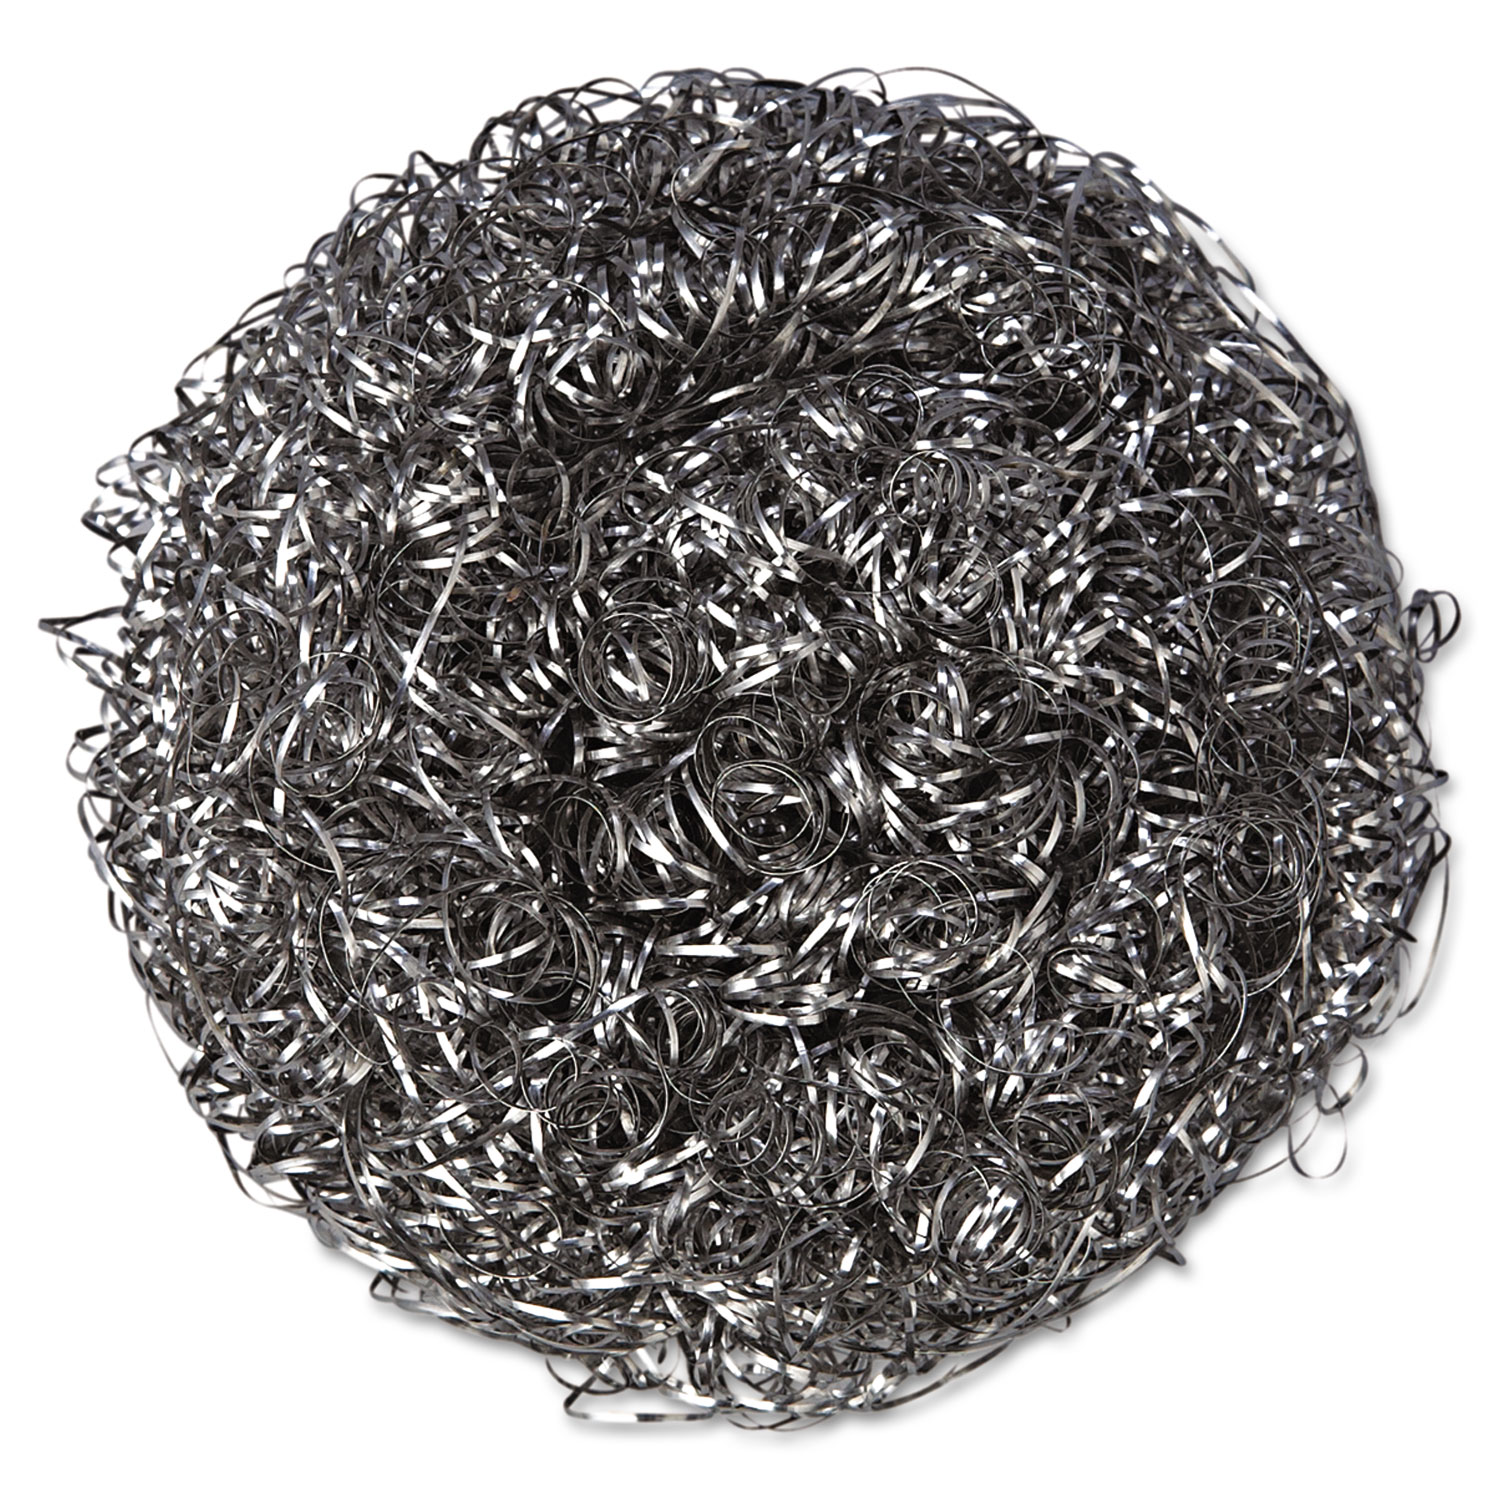  Kurly Kate 6375650 Stainless Steel Scrubbers, Large, Steel Gray, 12 Scrubbers/Bag, 6 Bags/Carton (PUX756) 